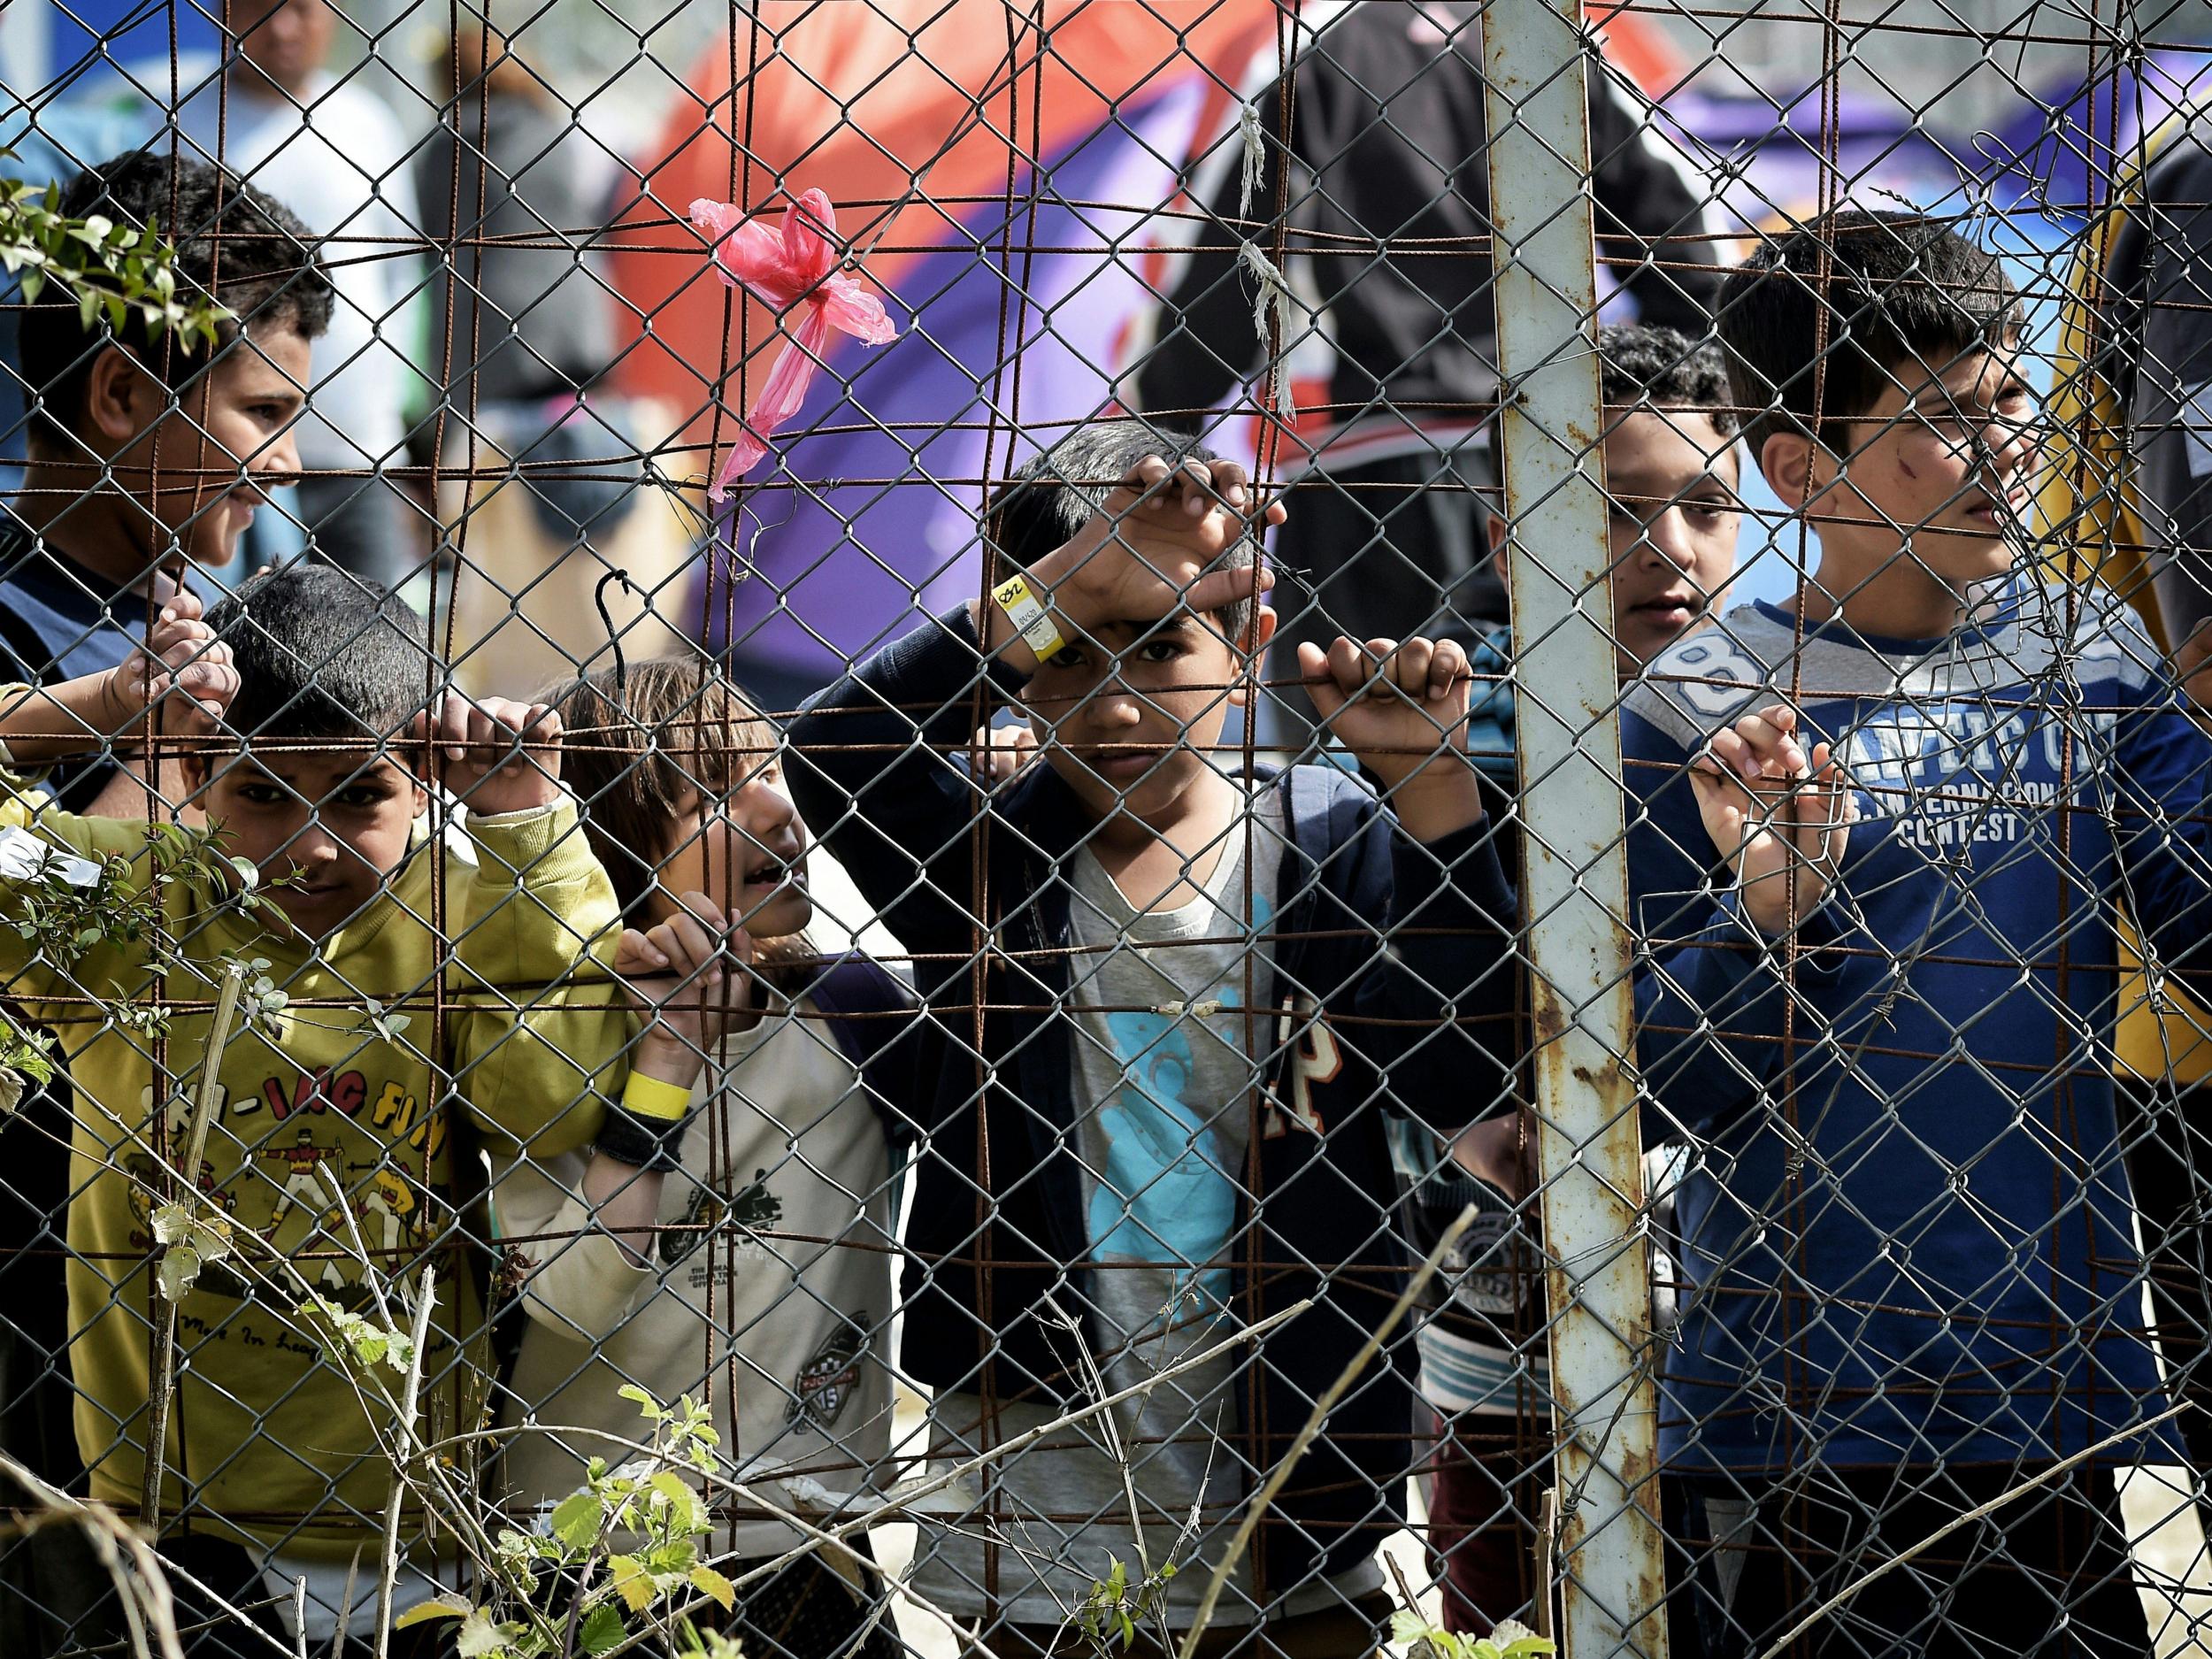 Child refugees held up at detention centre in Greece